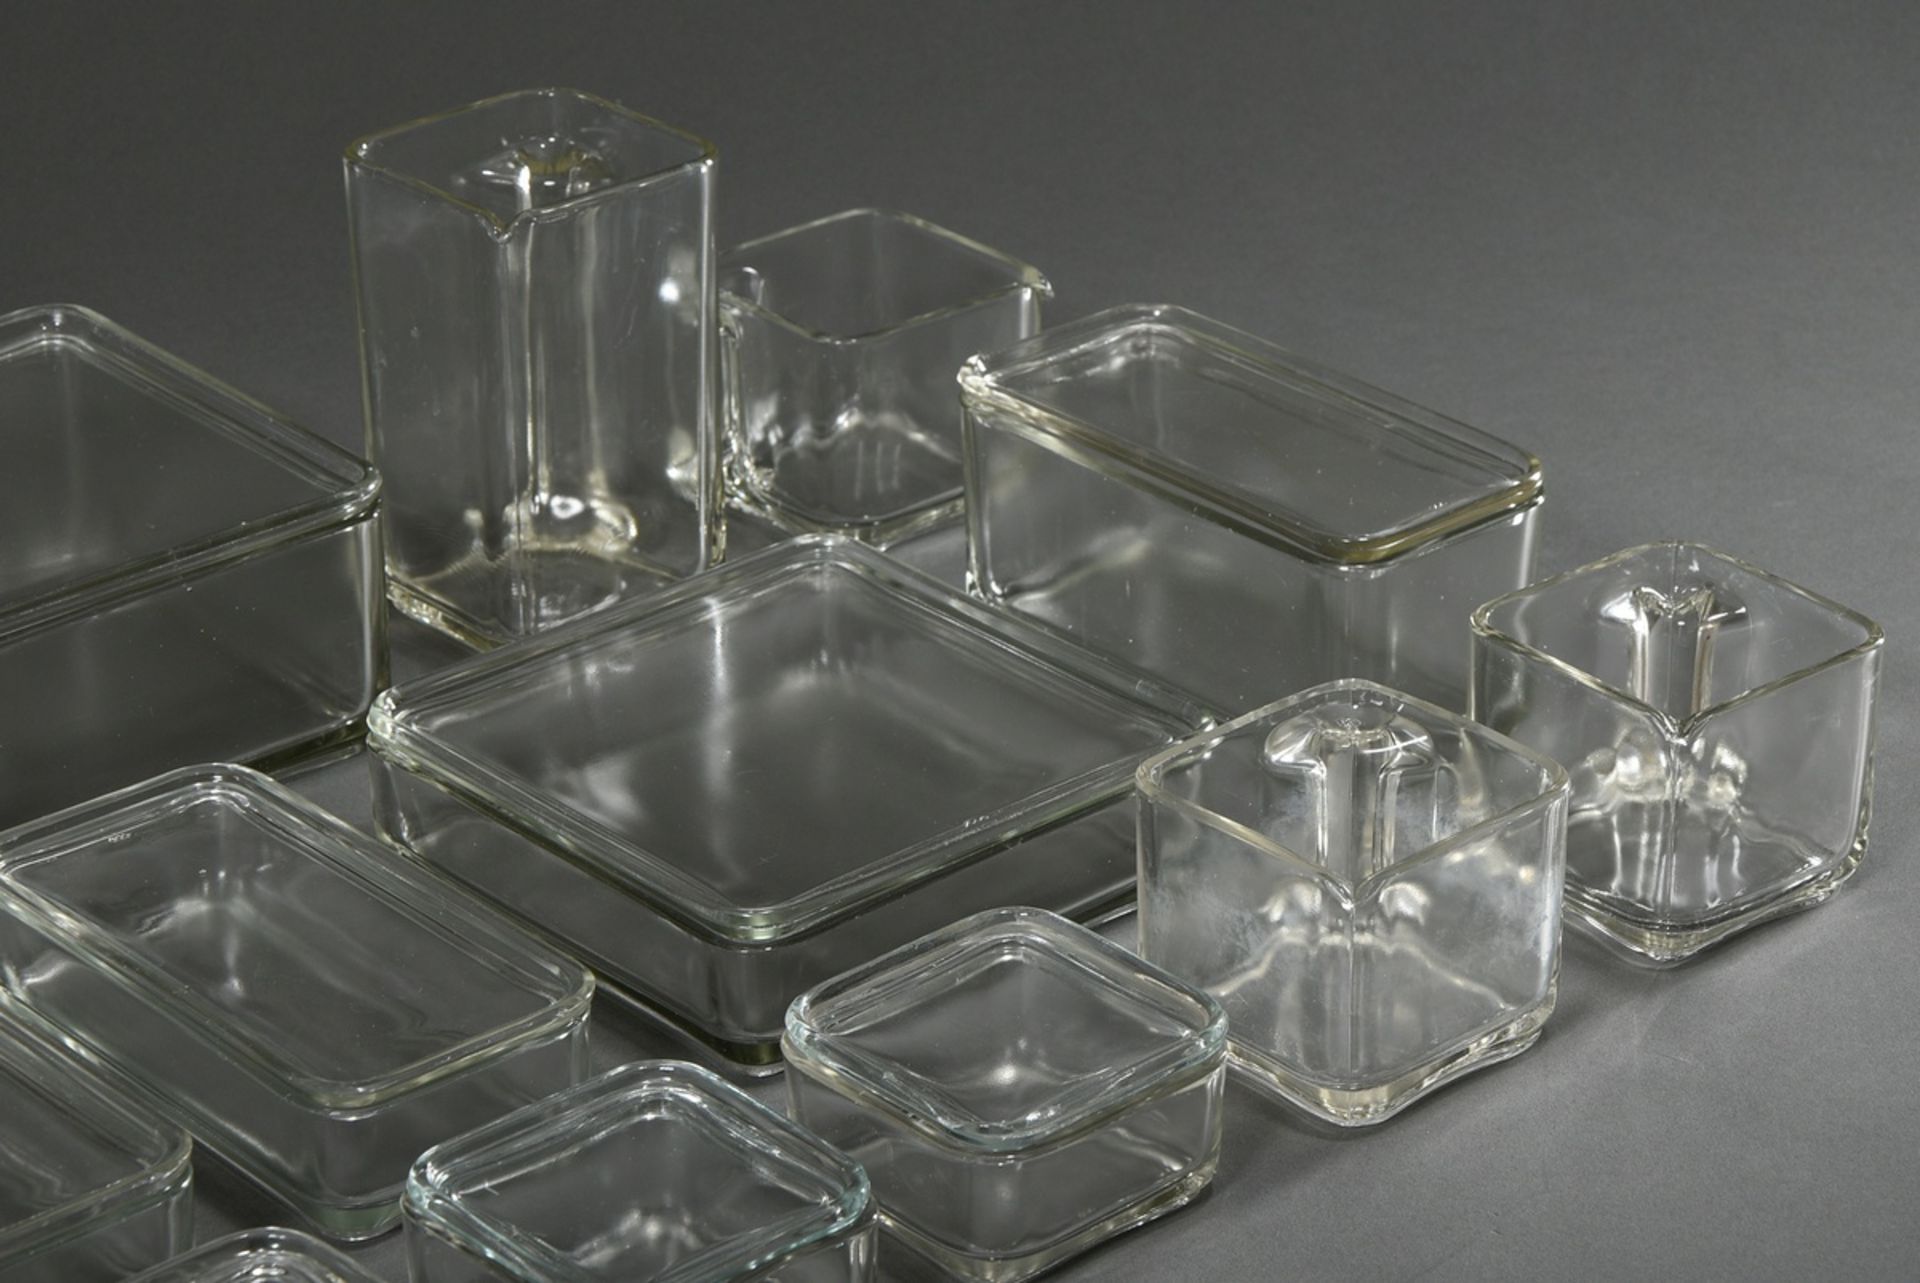 13 Stackable storage jars from the "Kubus-Geschirr", 7 with lids, colourless pressed glass, designe - Image 4 of 6